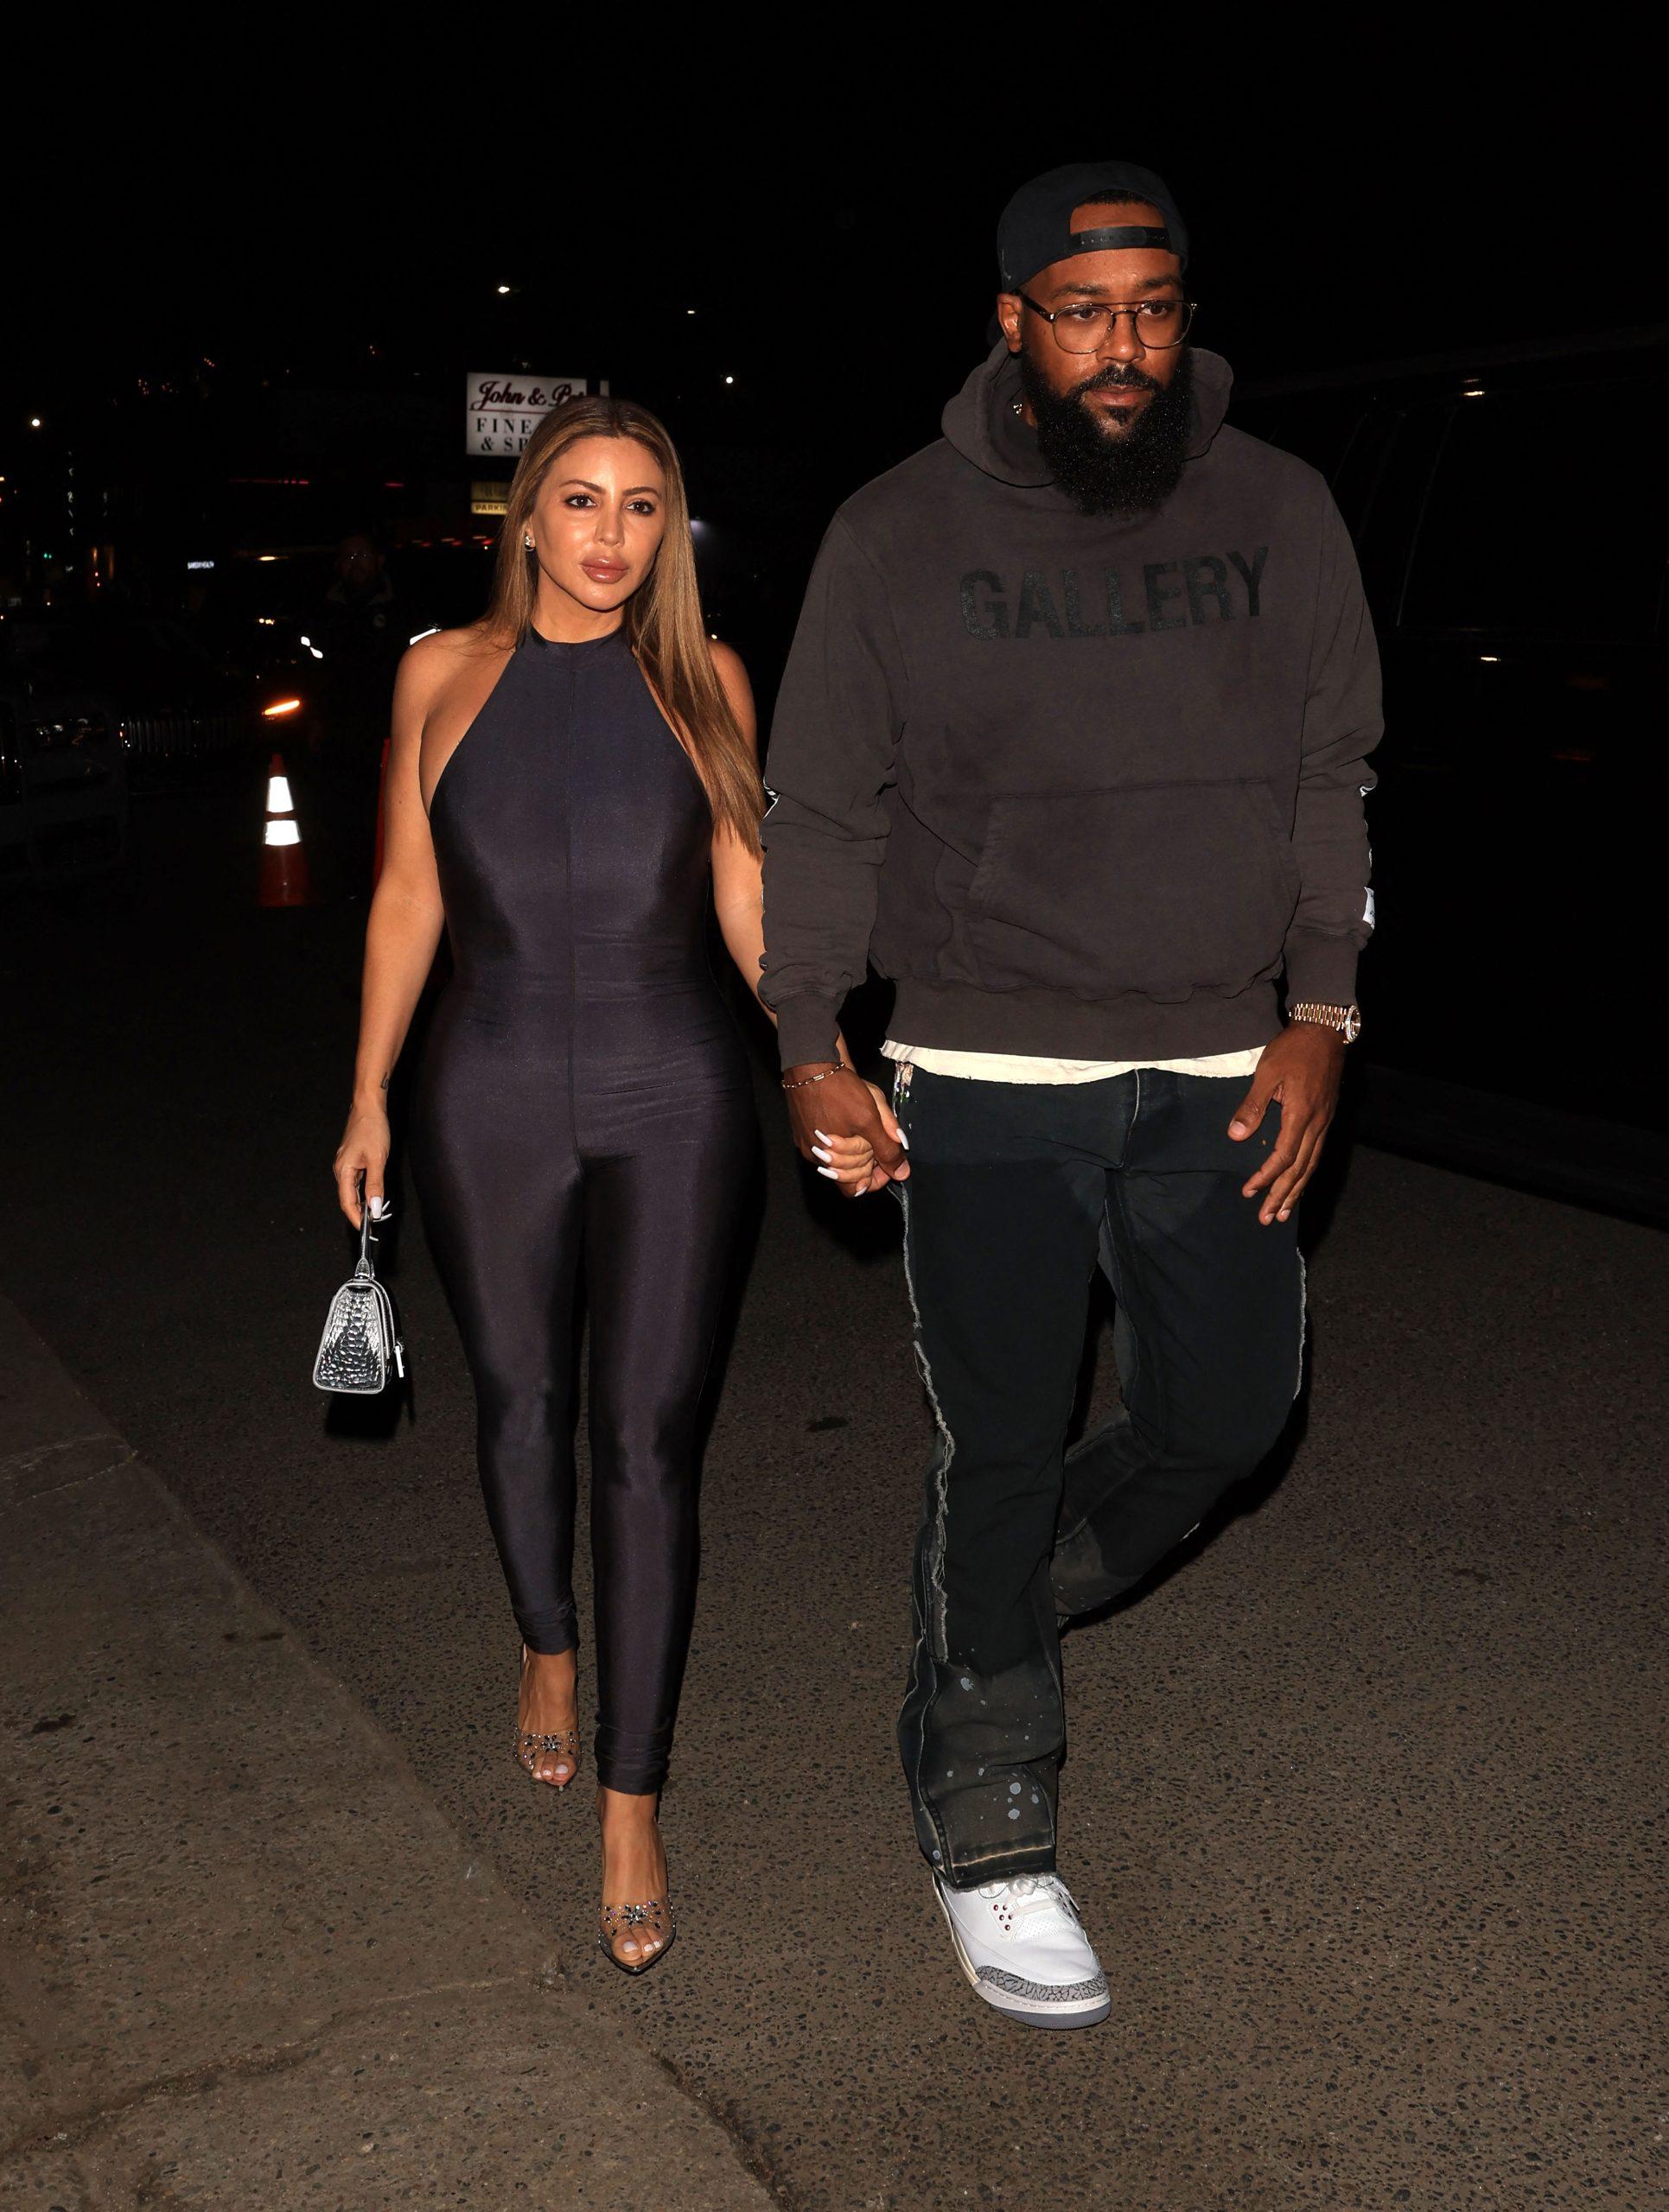 Larsa Pippen and Boyfriend Marcus Jordan walk hand-in-hand as they arrive for dinner at Catch Steak LA